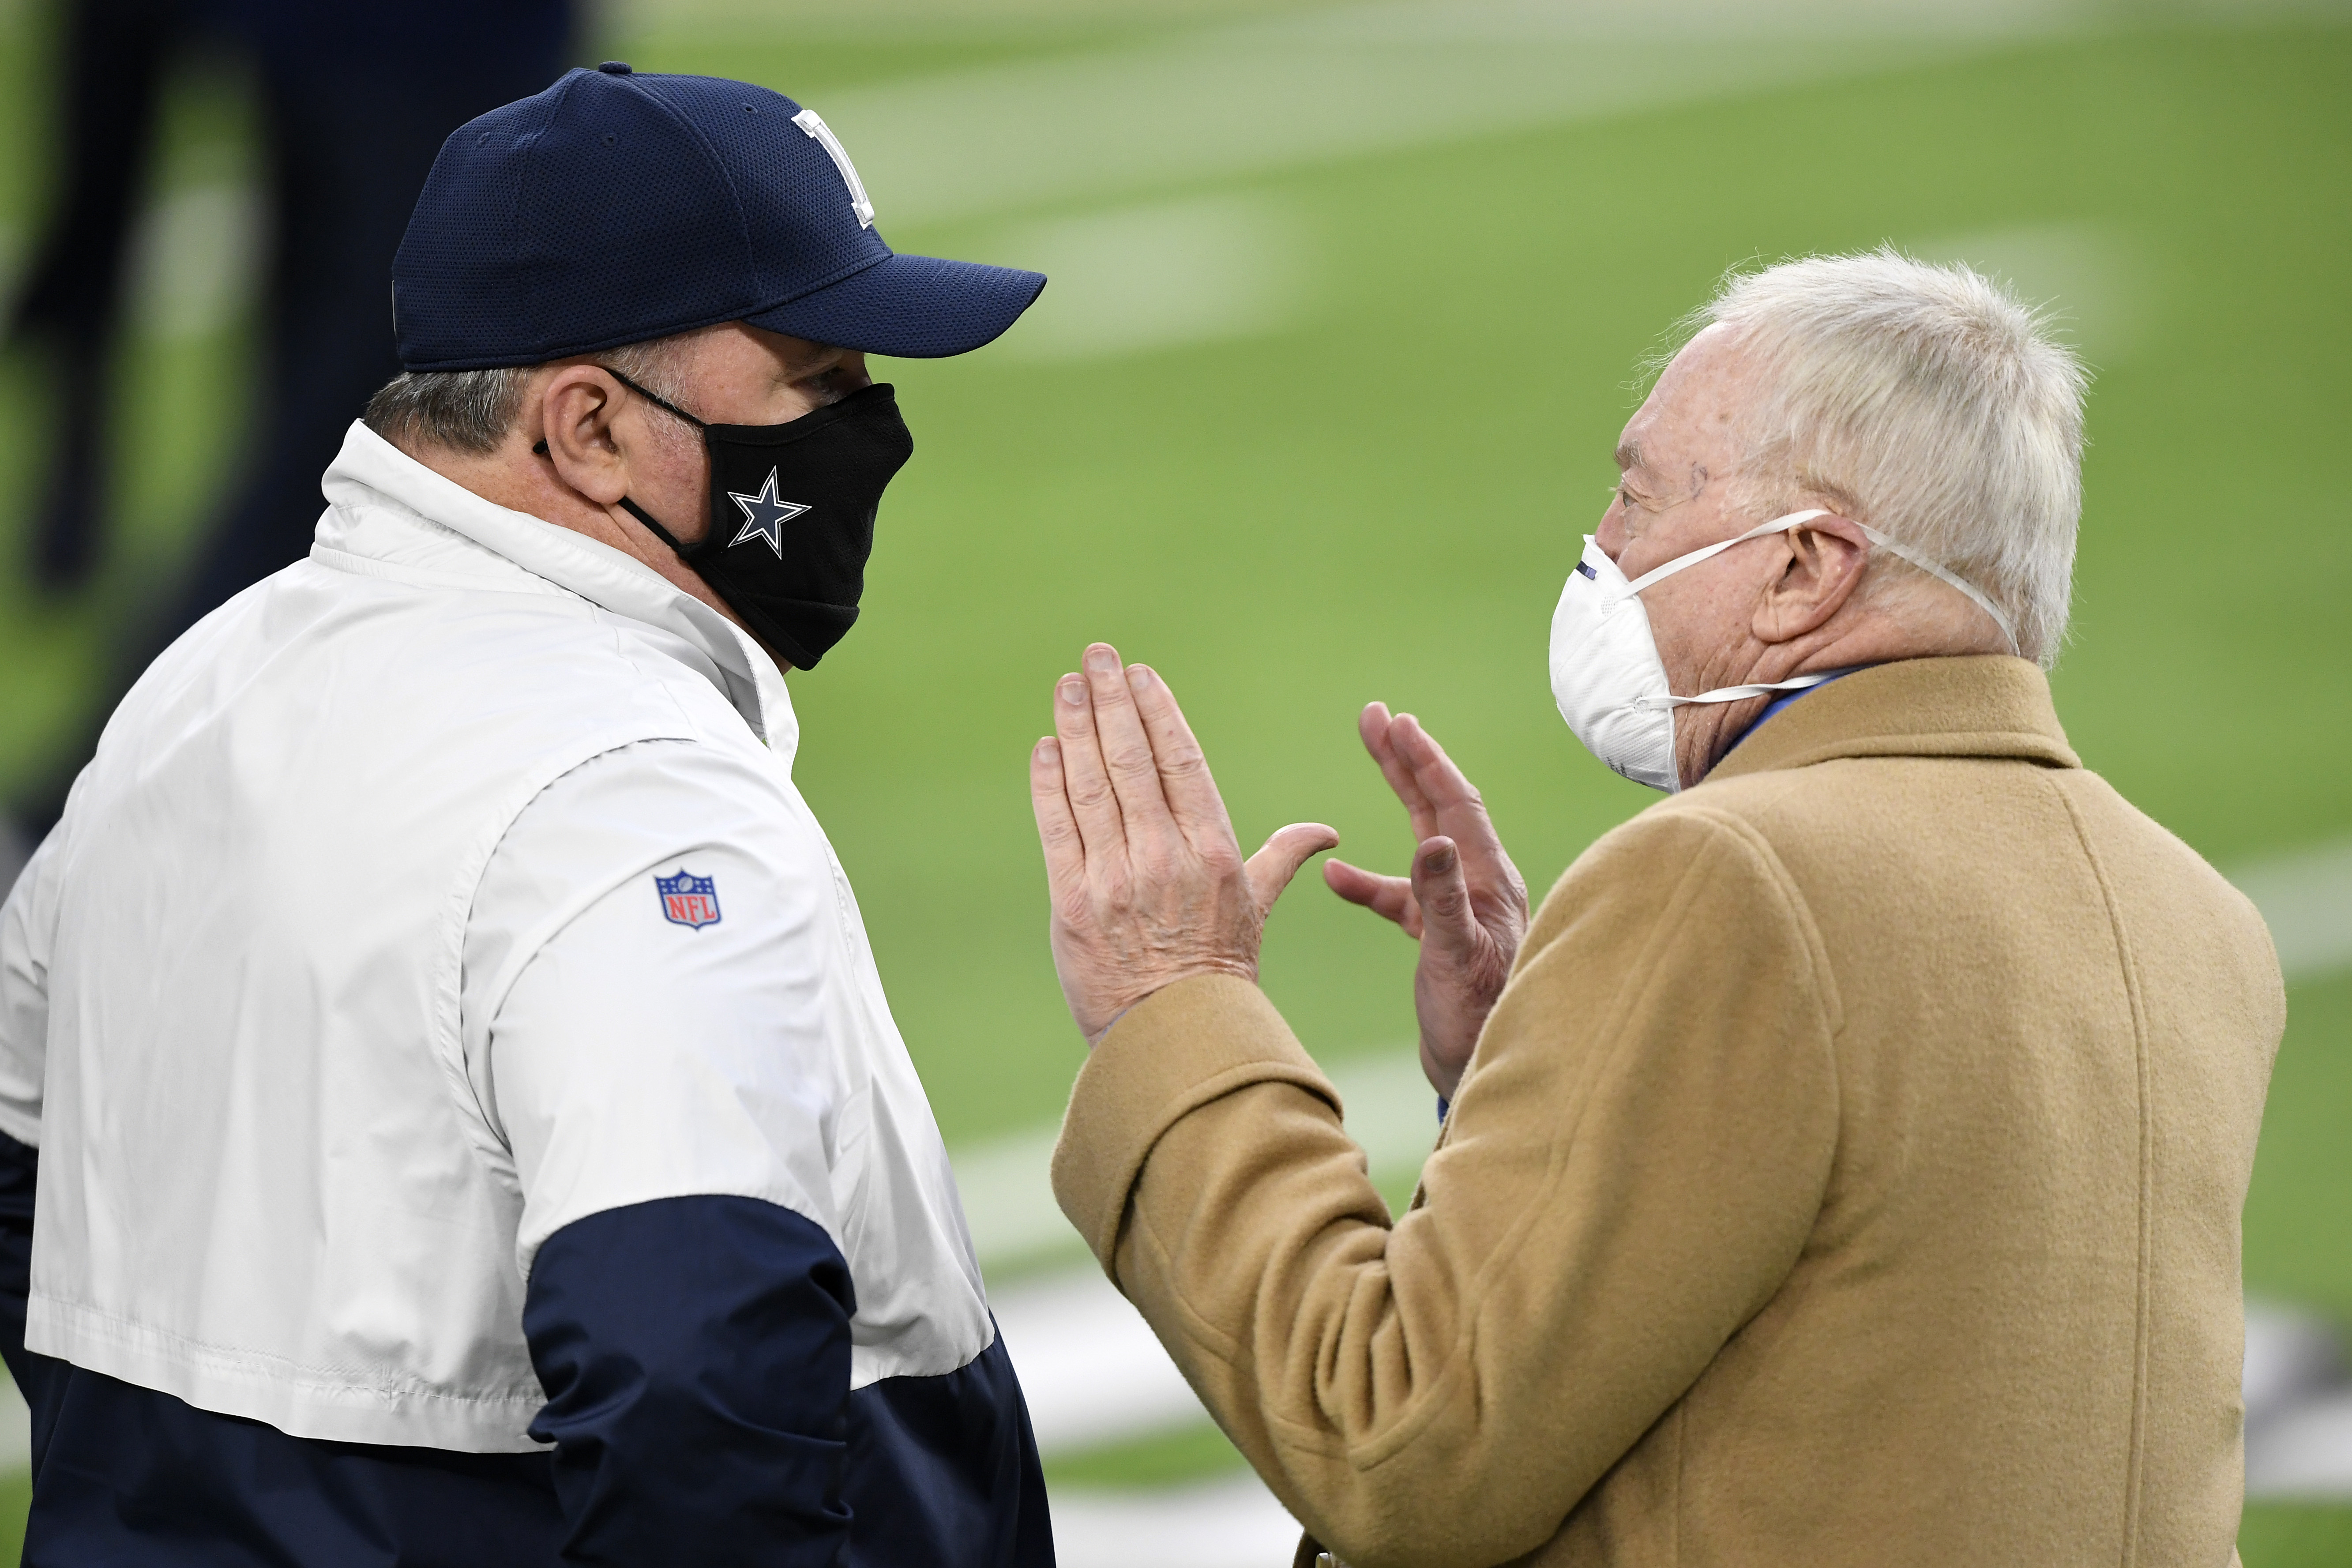 Cowboys' Jerry Jones Won't Endorse Mike McCarthy as HC; Has a Lot to Think About